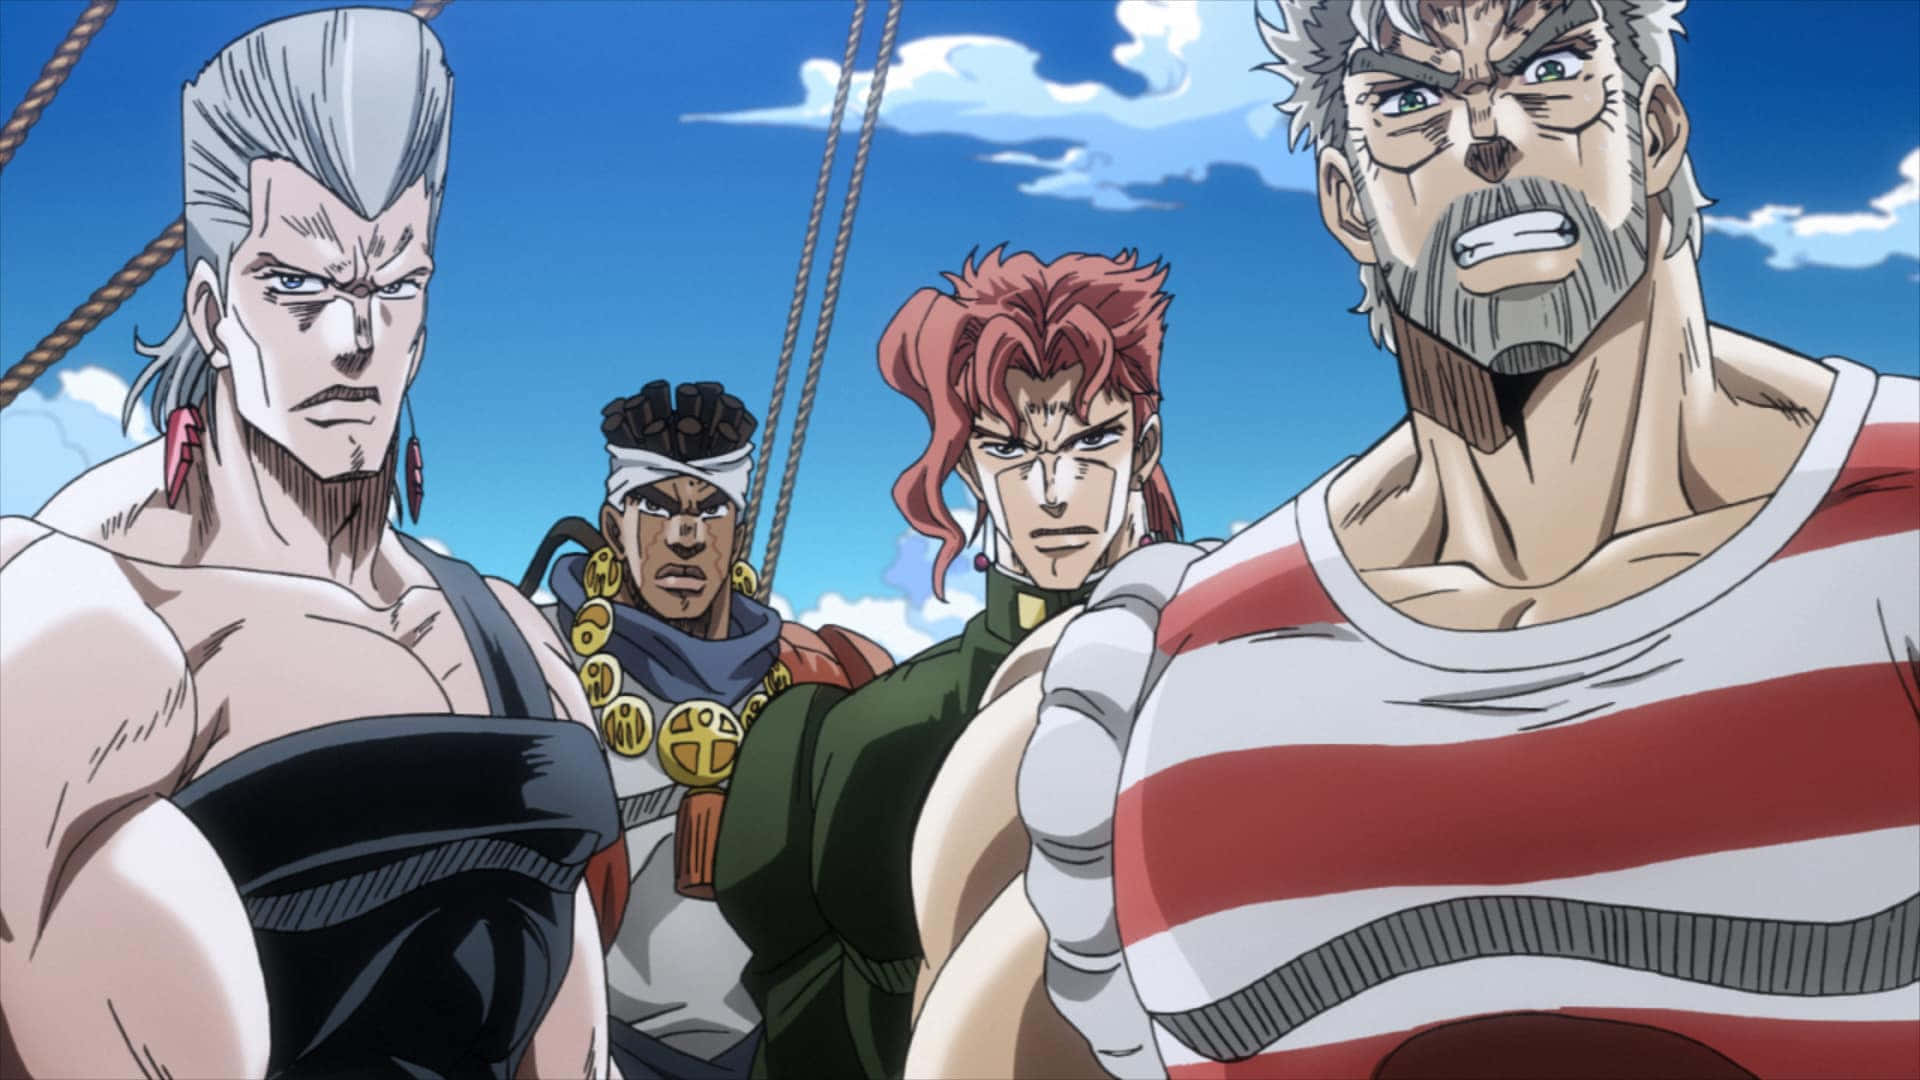 The legendary heroes of Stardust Crusaders in action Wallpaper